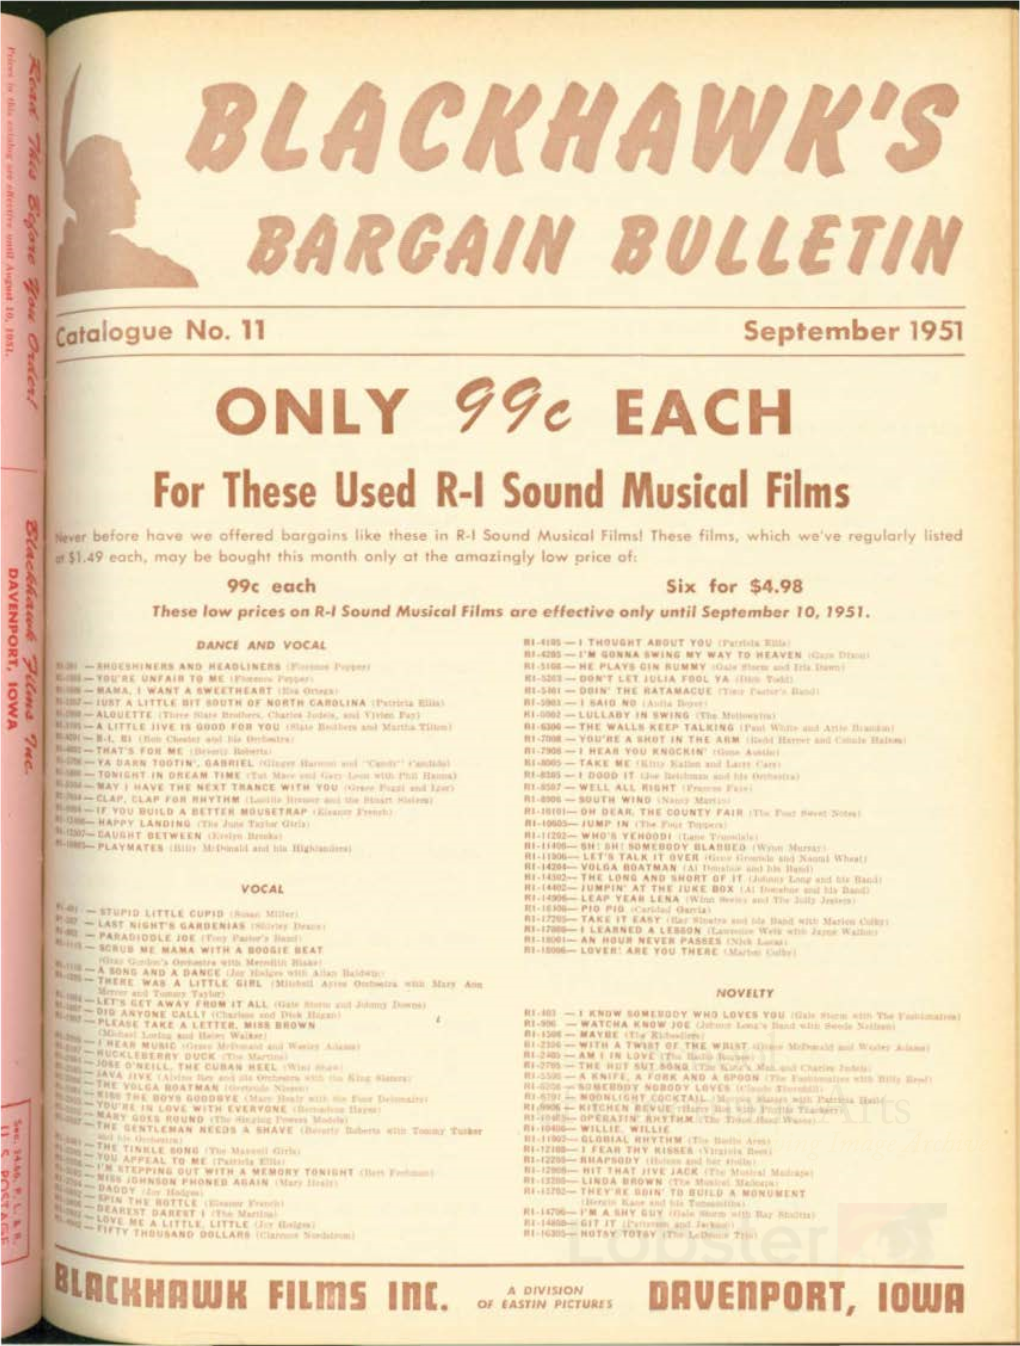 For These Used R-1 Sound Musical Films